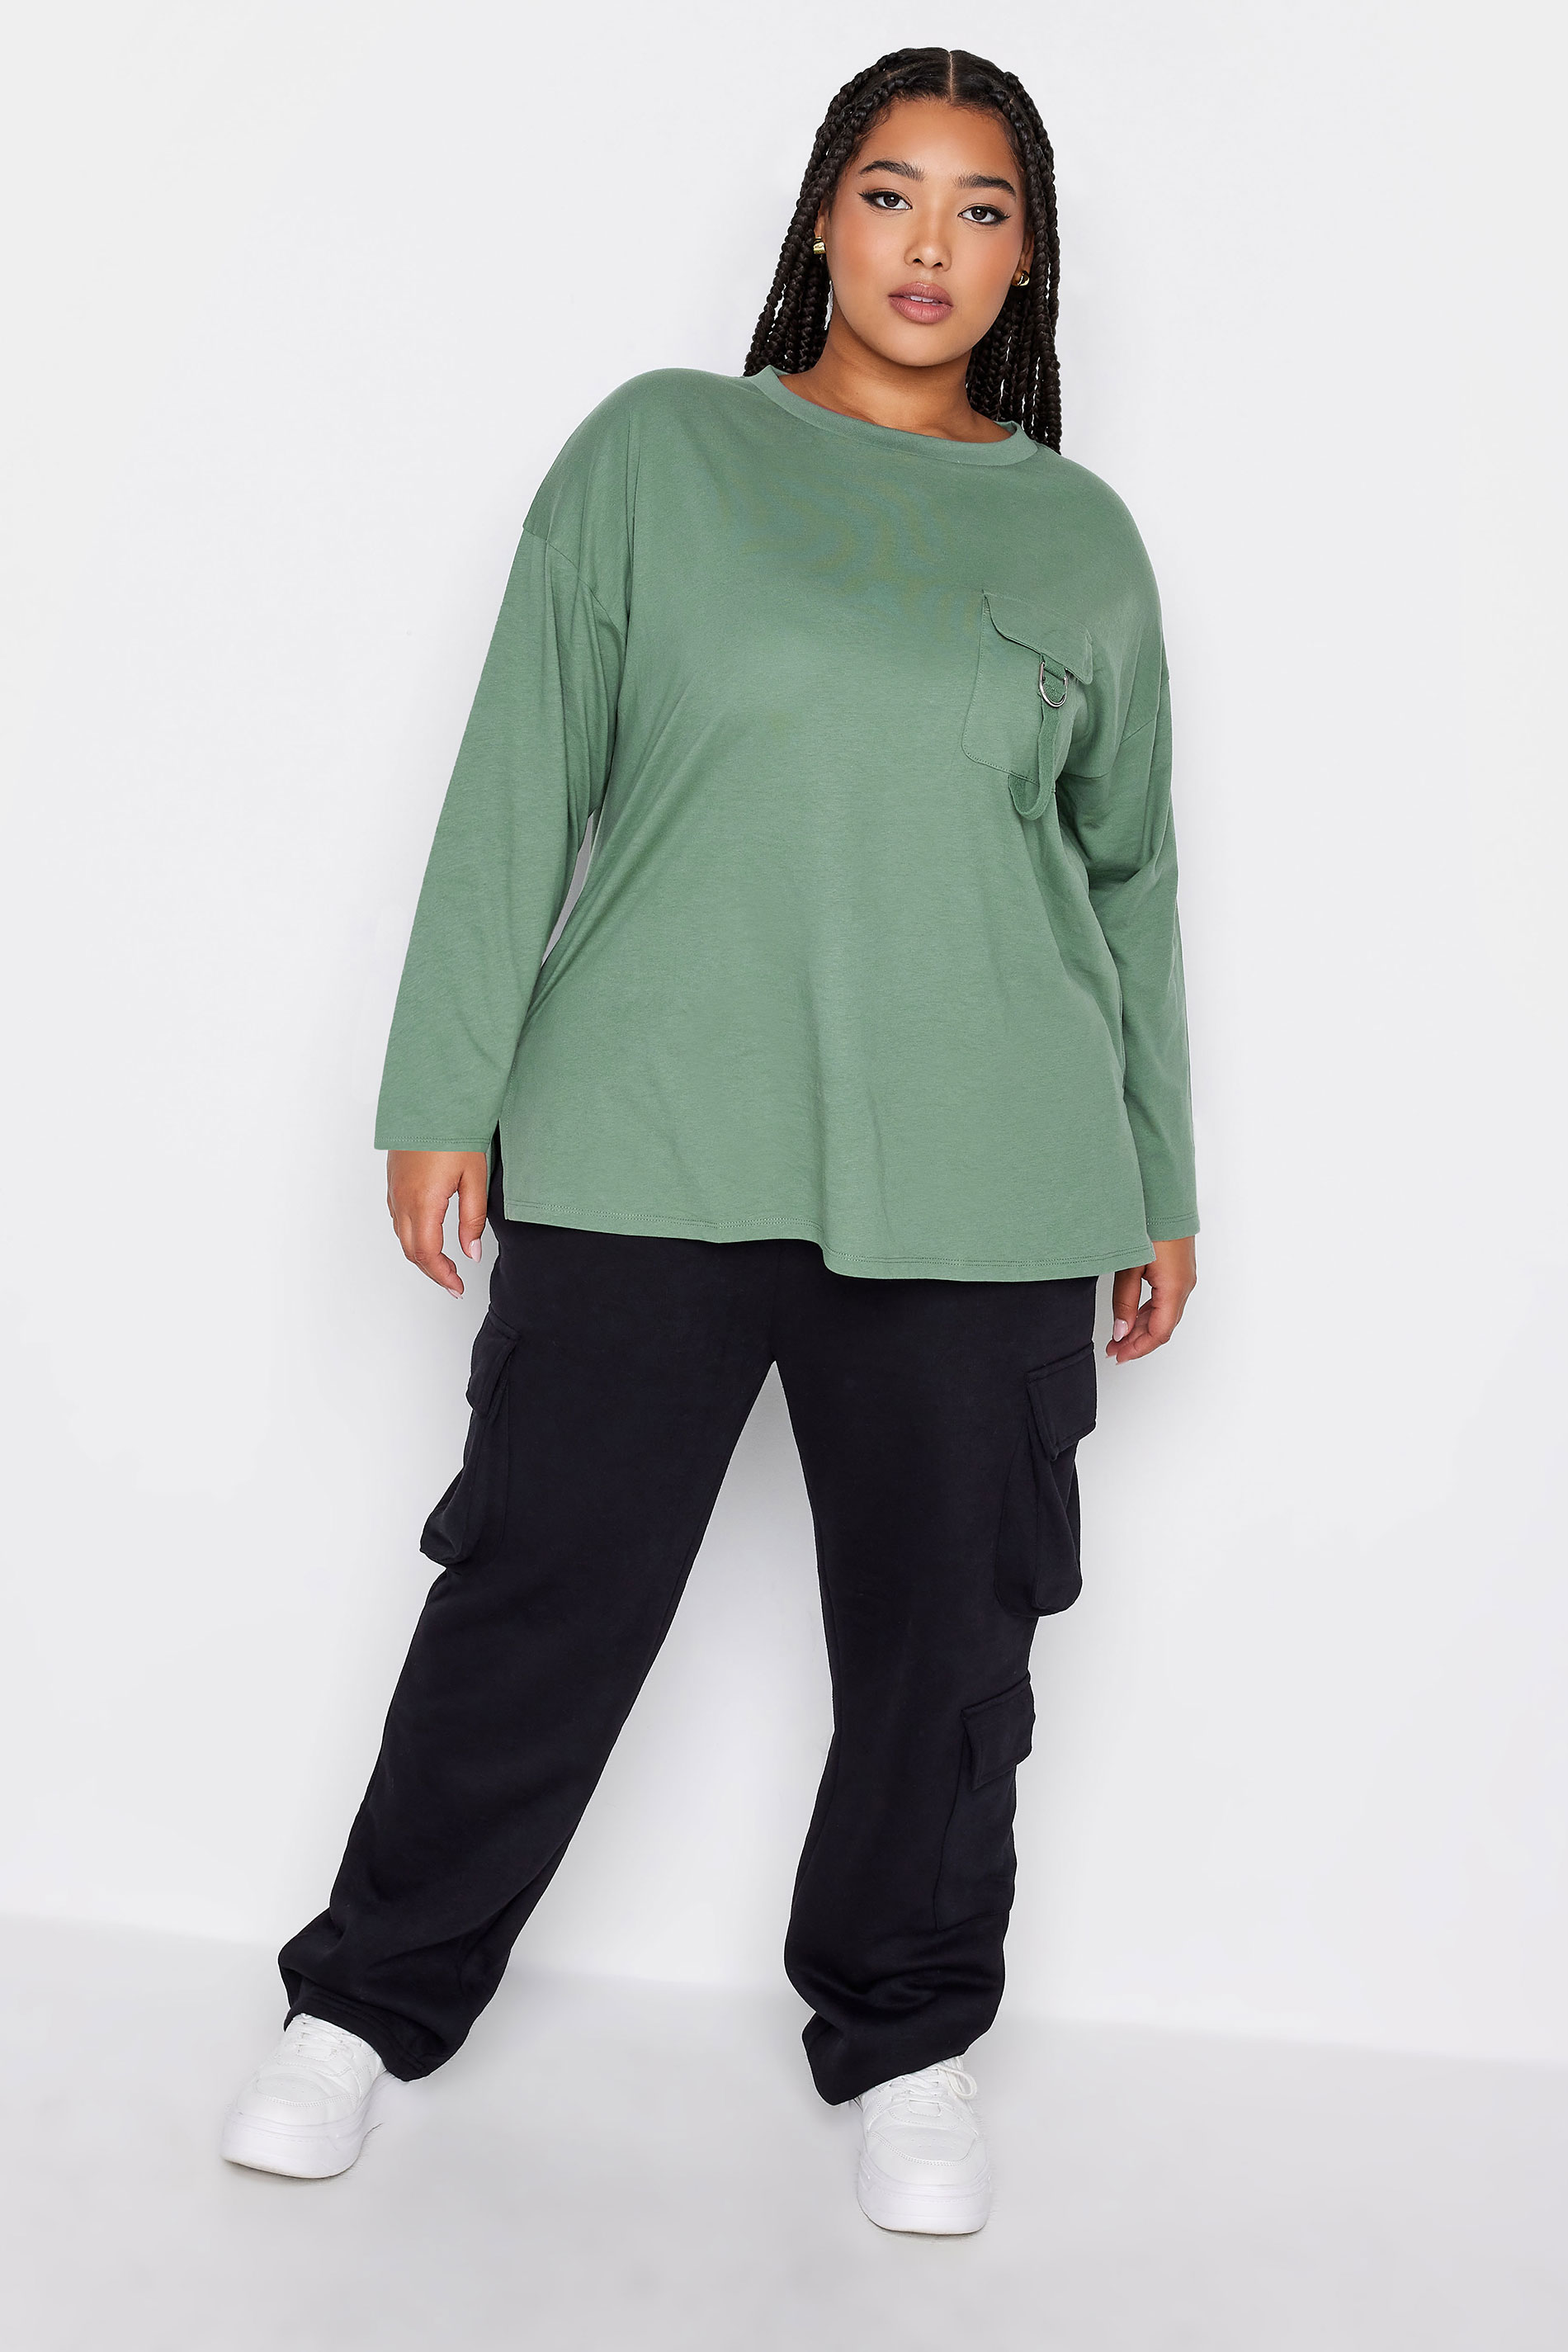 LIMITED COLLECTION Plus Size Green Utility Pocket Long Sleeve T-Shirt | Yours Clothing 2